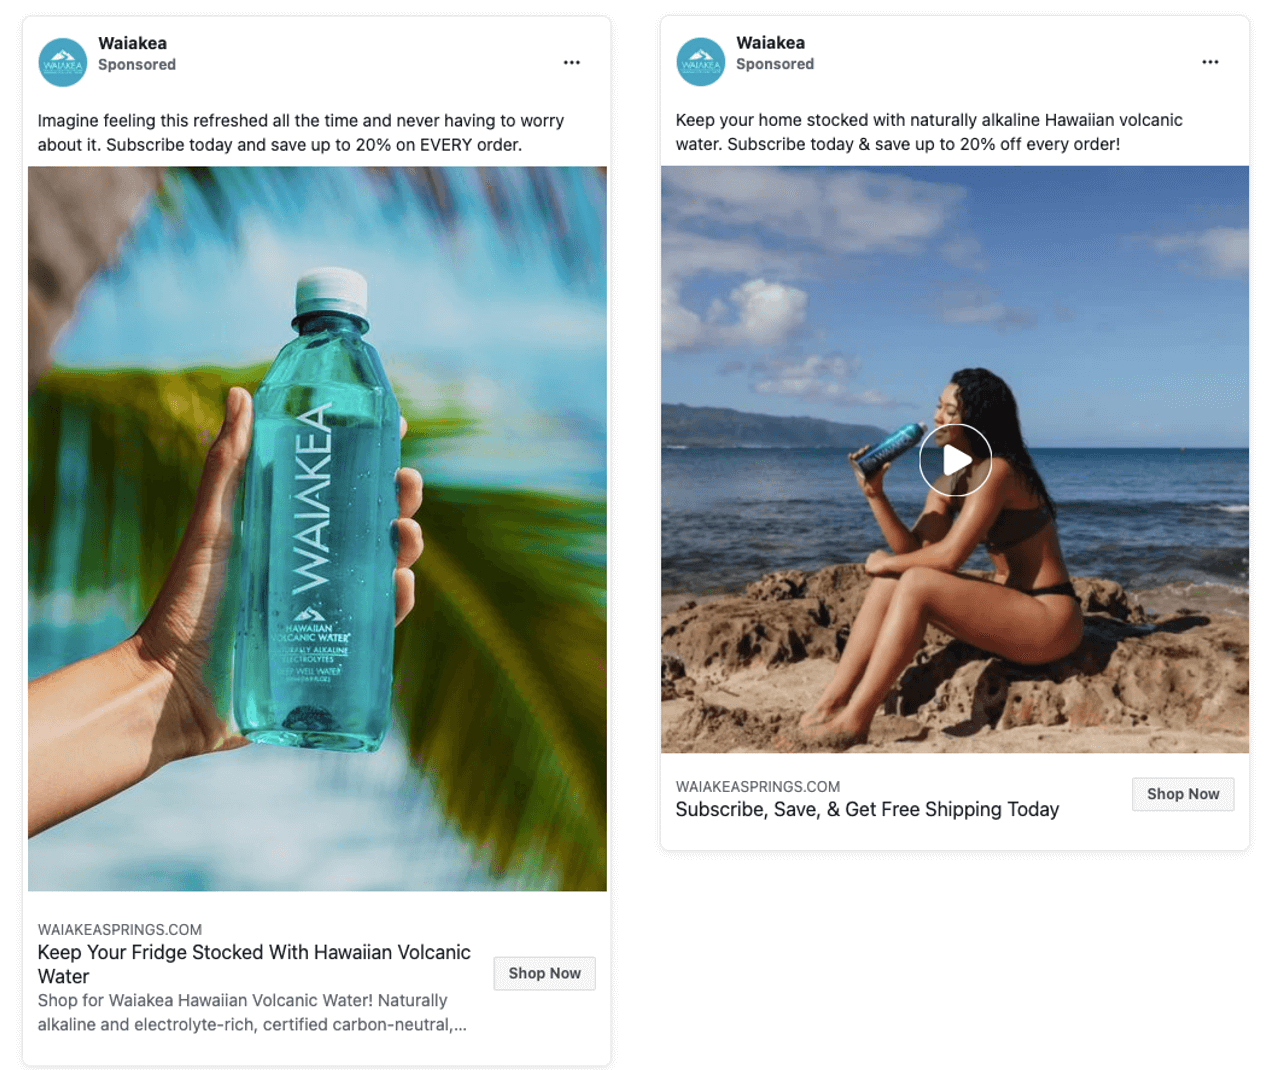 Waiakea grew brand awareness in a busy market with educational content